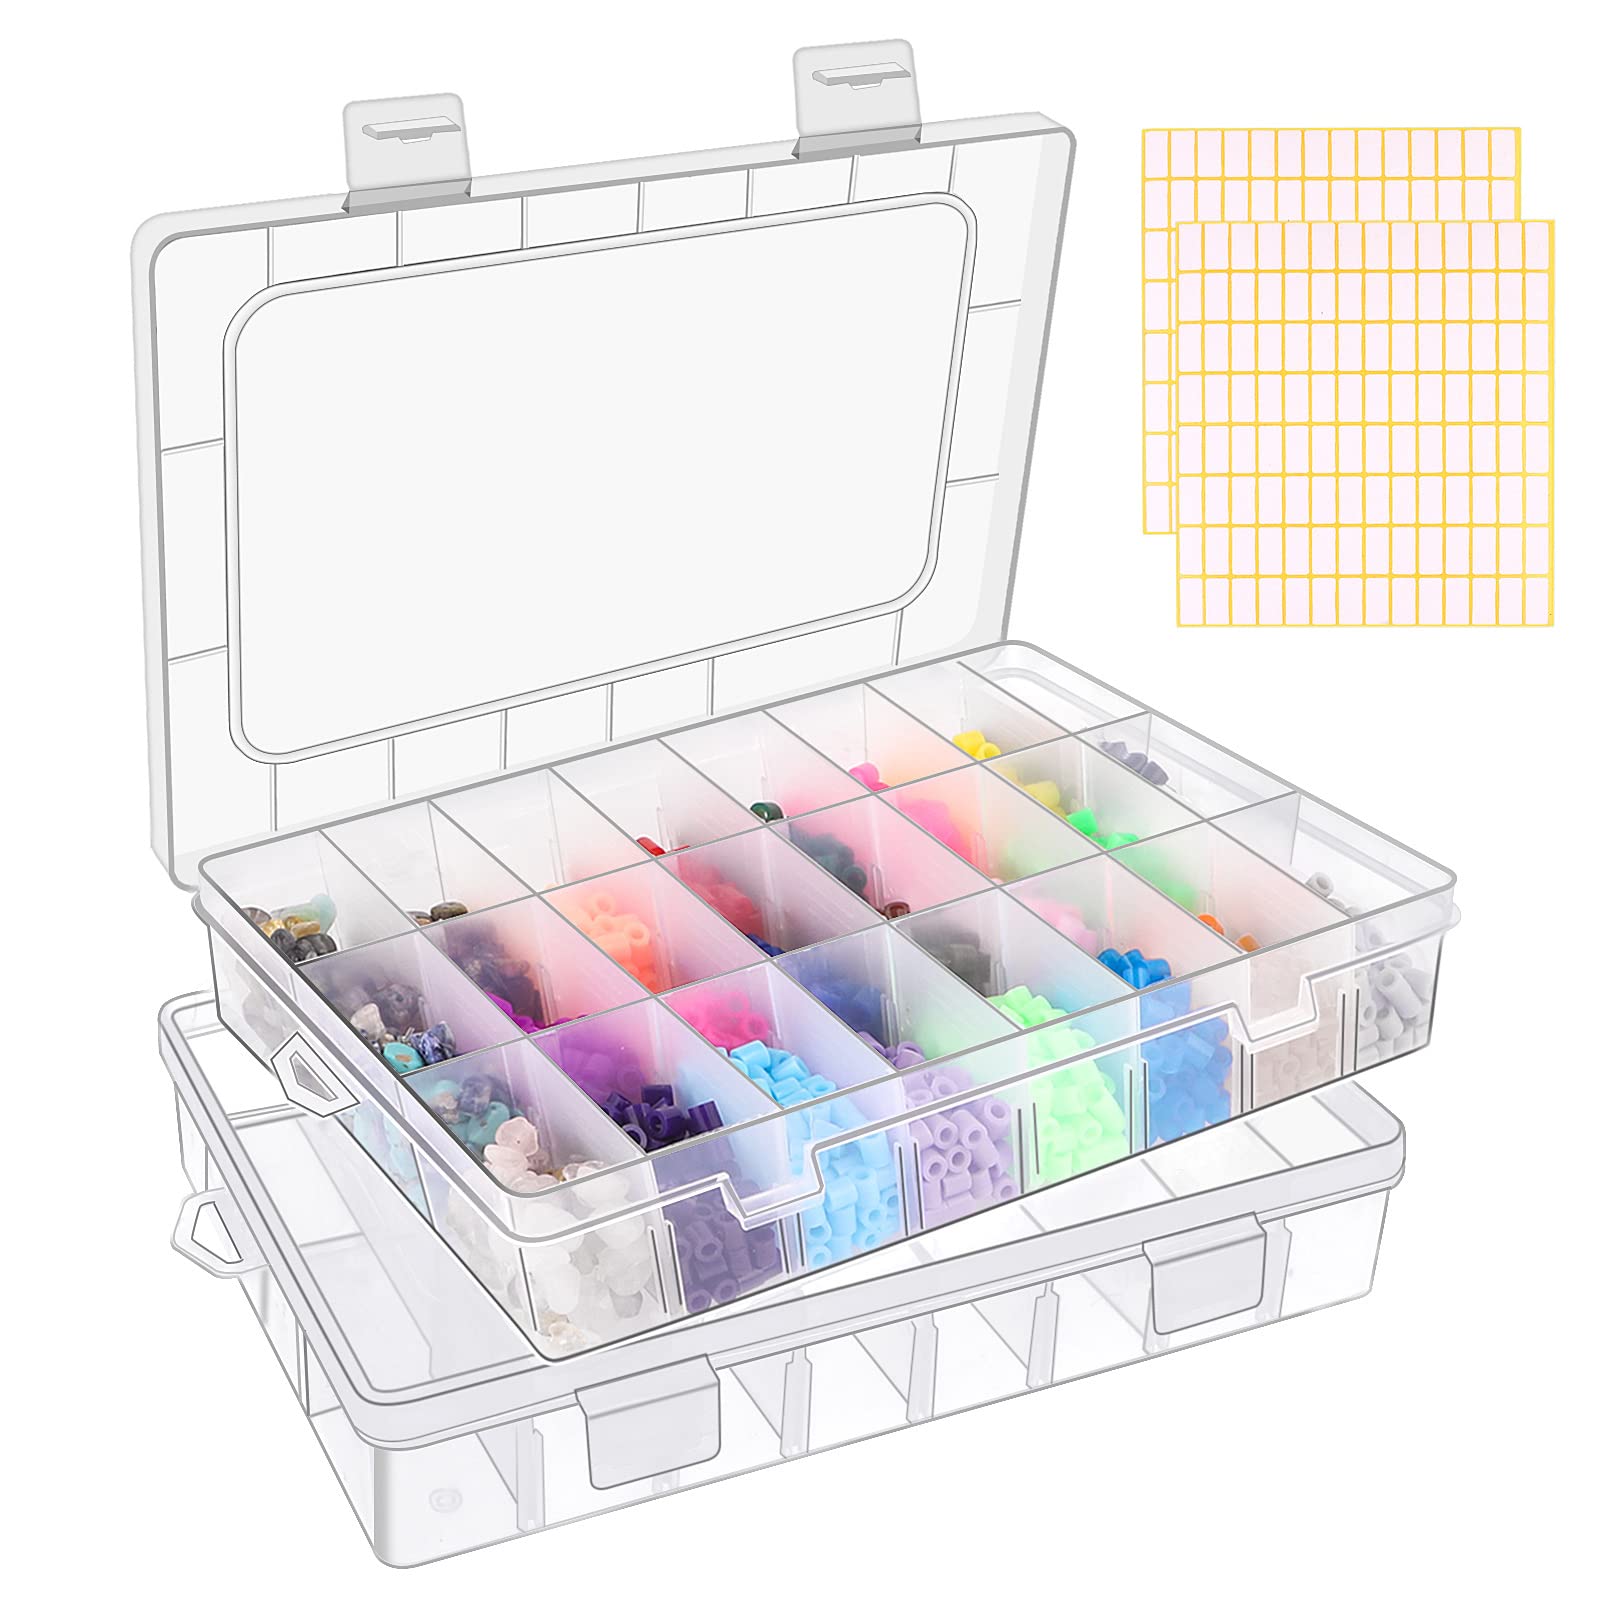 2 Pack 24 Grids Clear Plastic Organizer Box, Storage Container with Adjustable Divider, Craft Organizers and Storage Bead Storage Organizer Box for DIY Jewelry Tackles with 2 Sheets Label Stickers